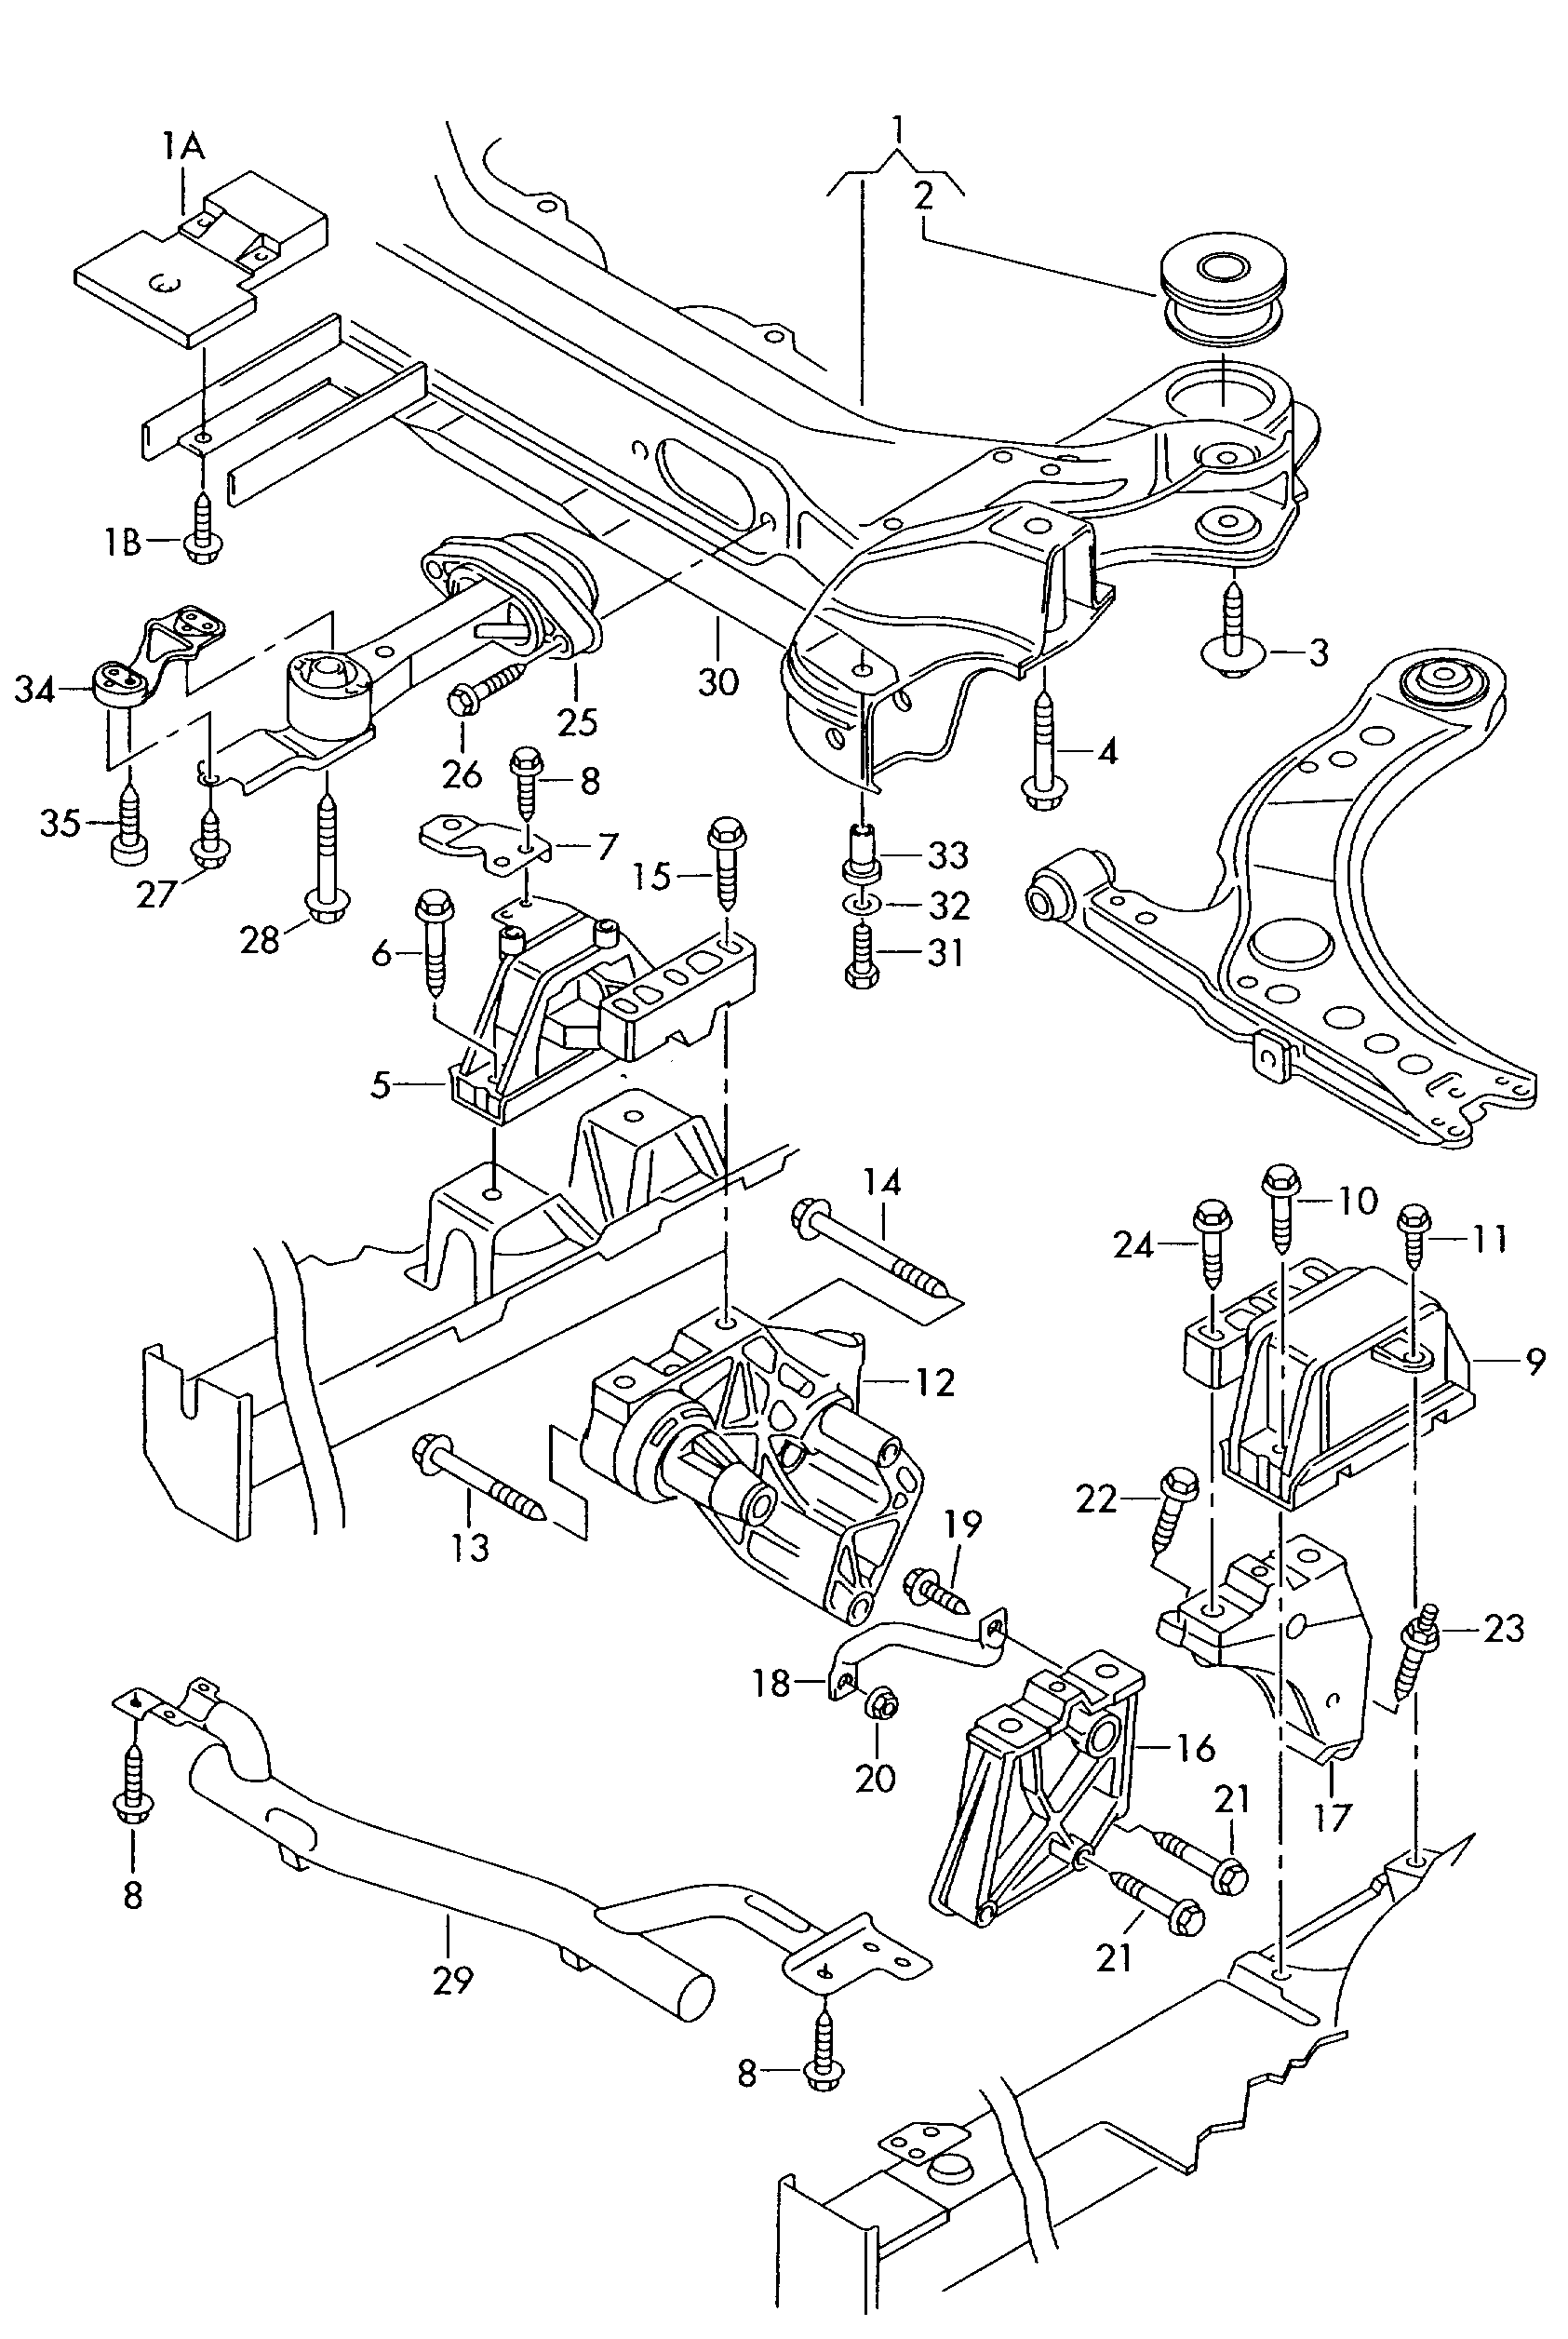 mounting parts for engine and<br>transmission  - Beetle - be